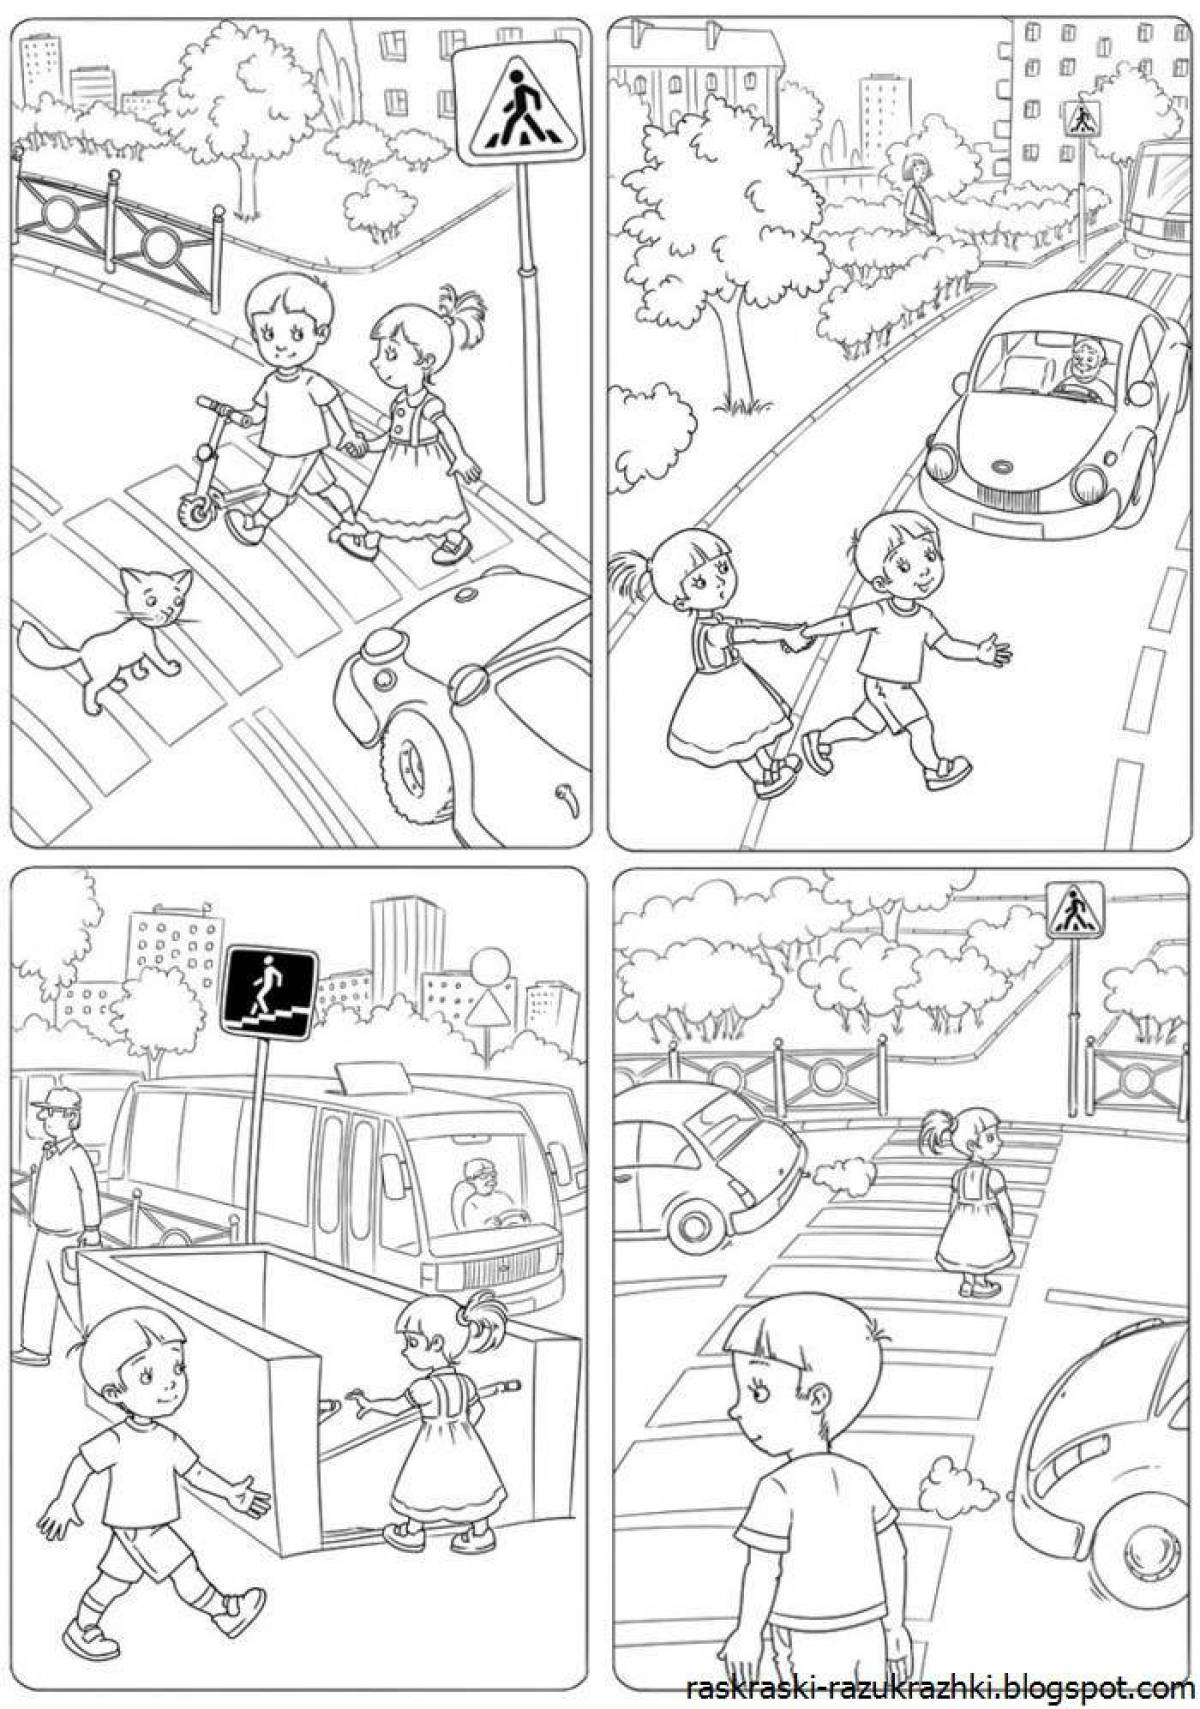 Excellent Rules of the Road coloring page